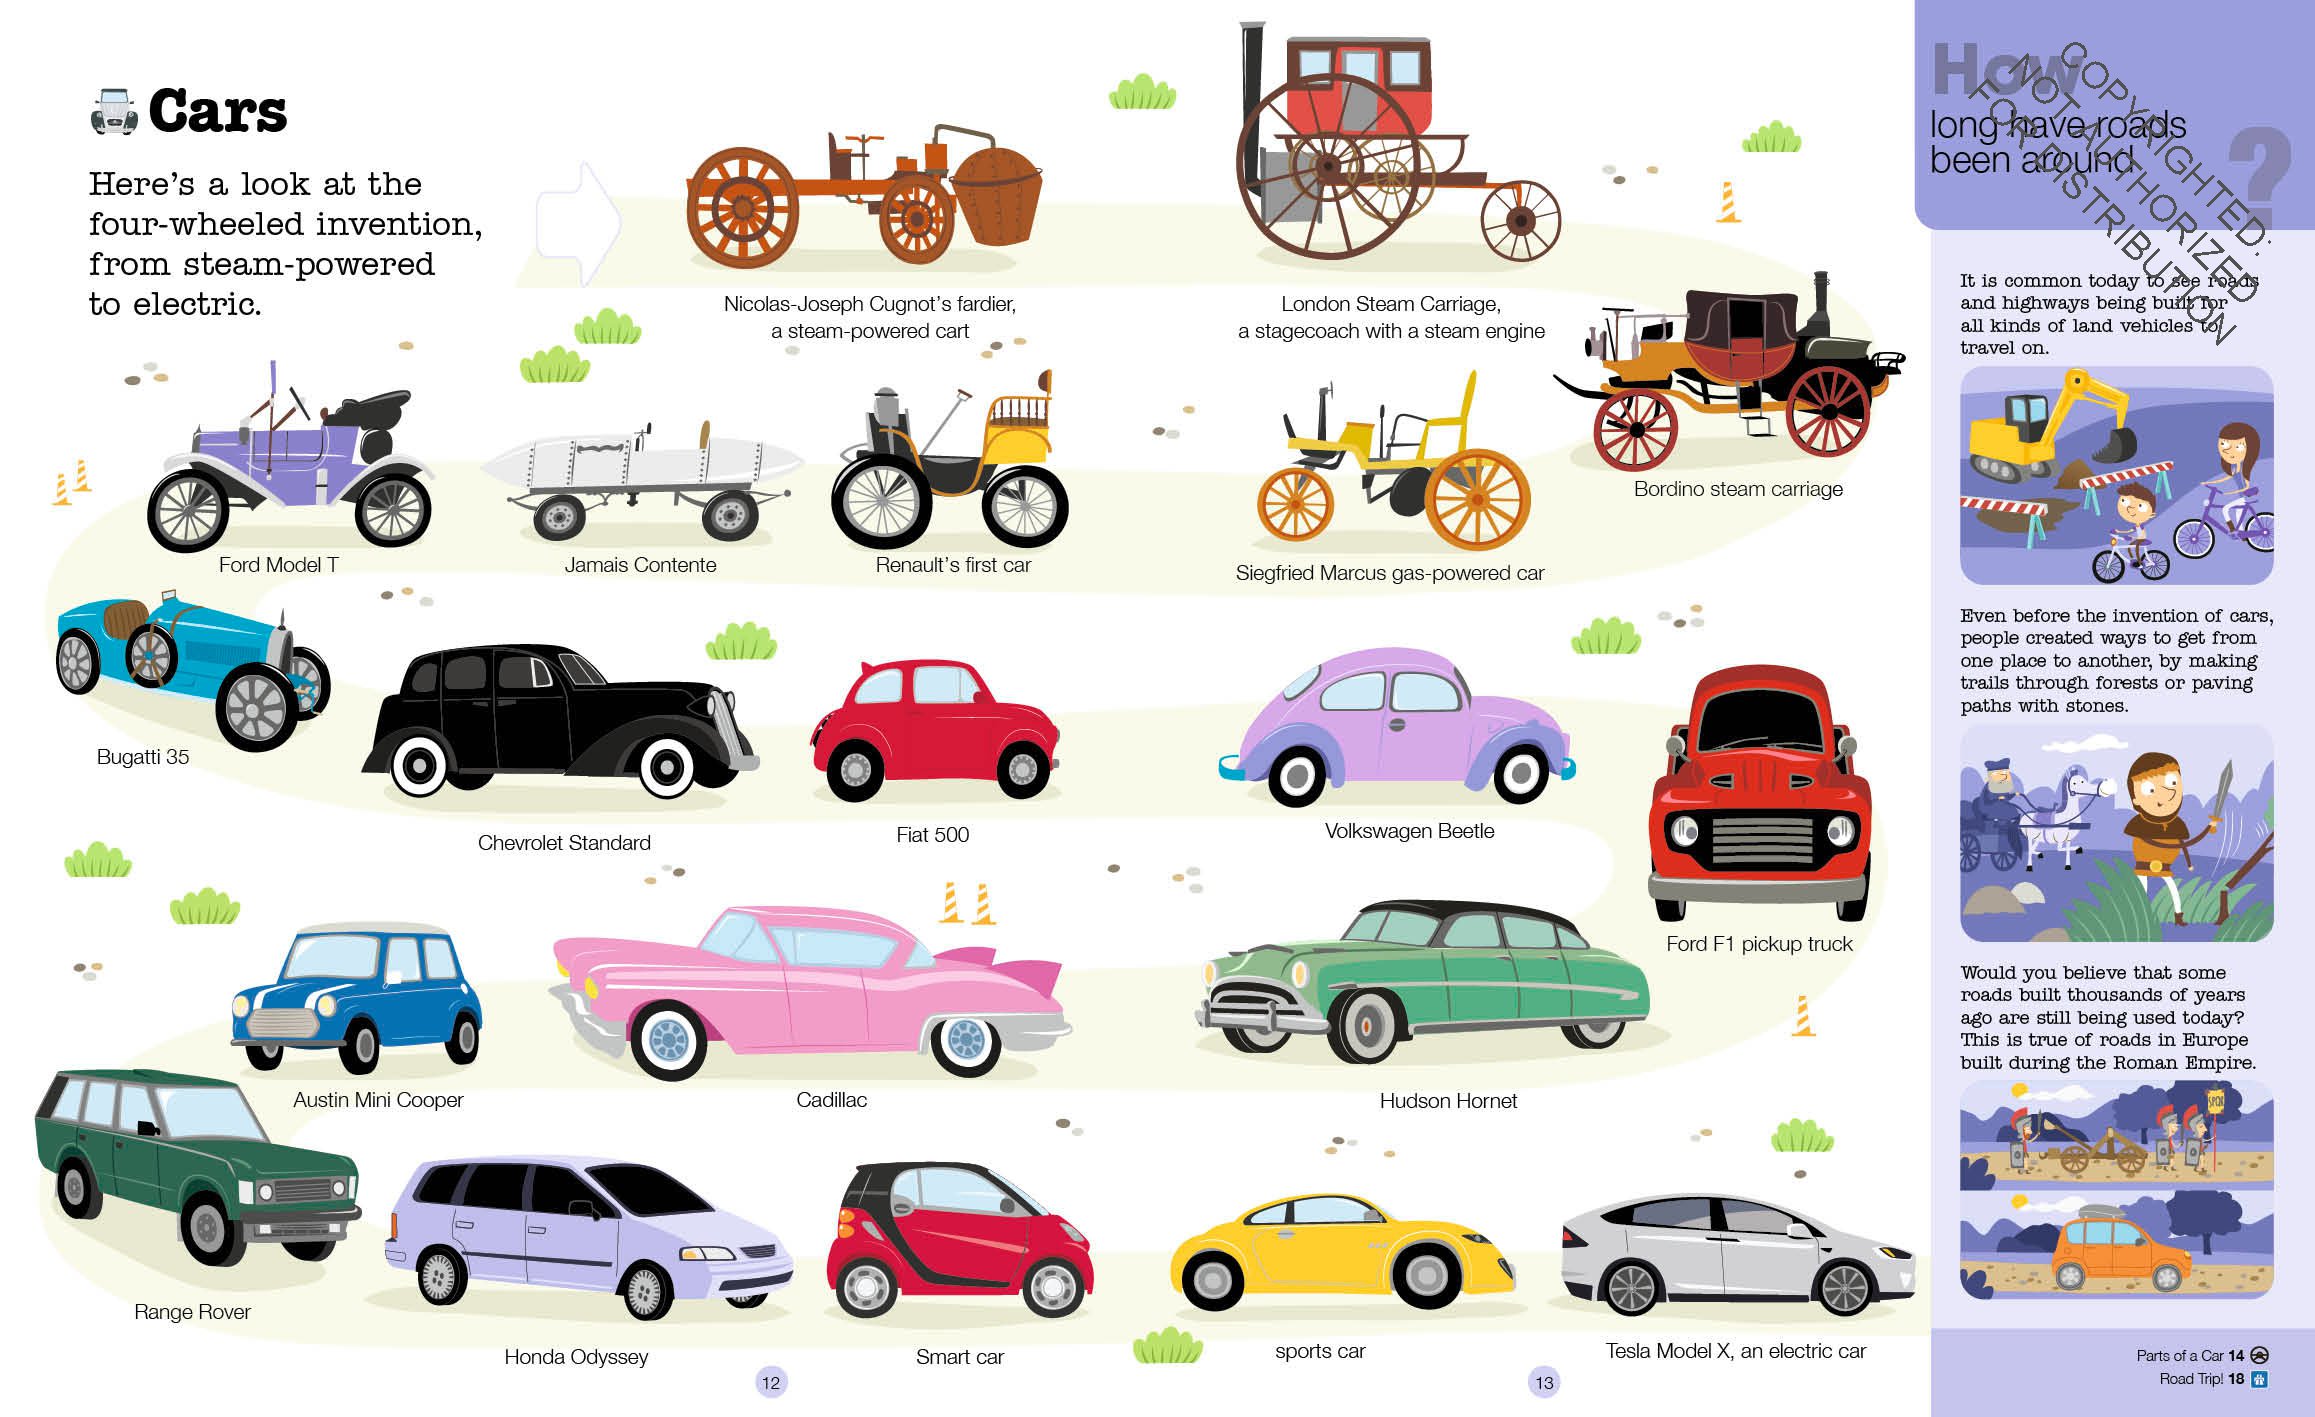 Do You Know?: Vehicles and Transportation